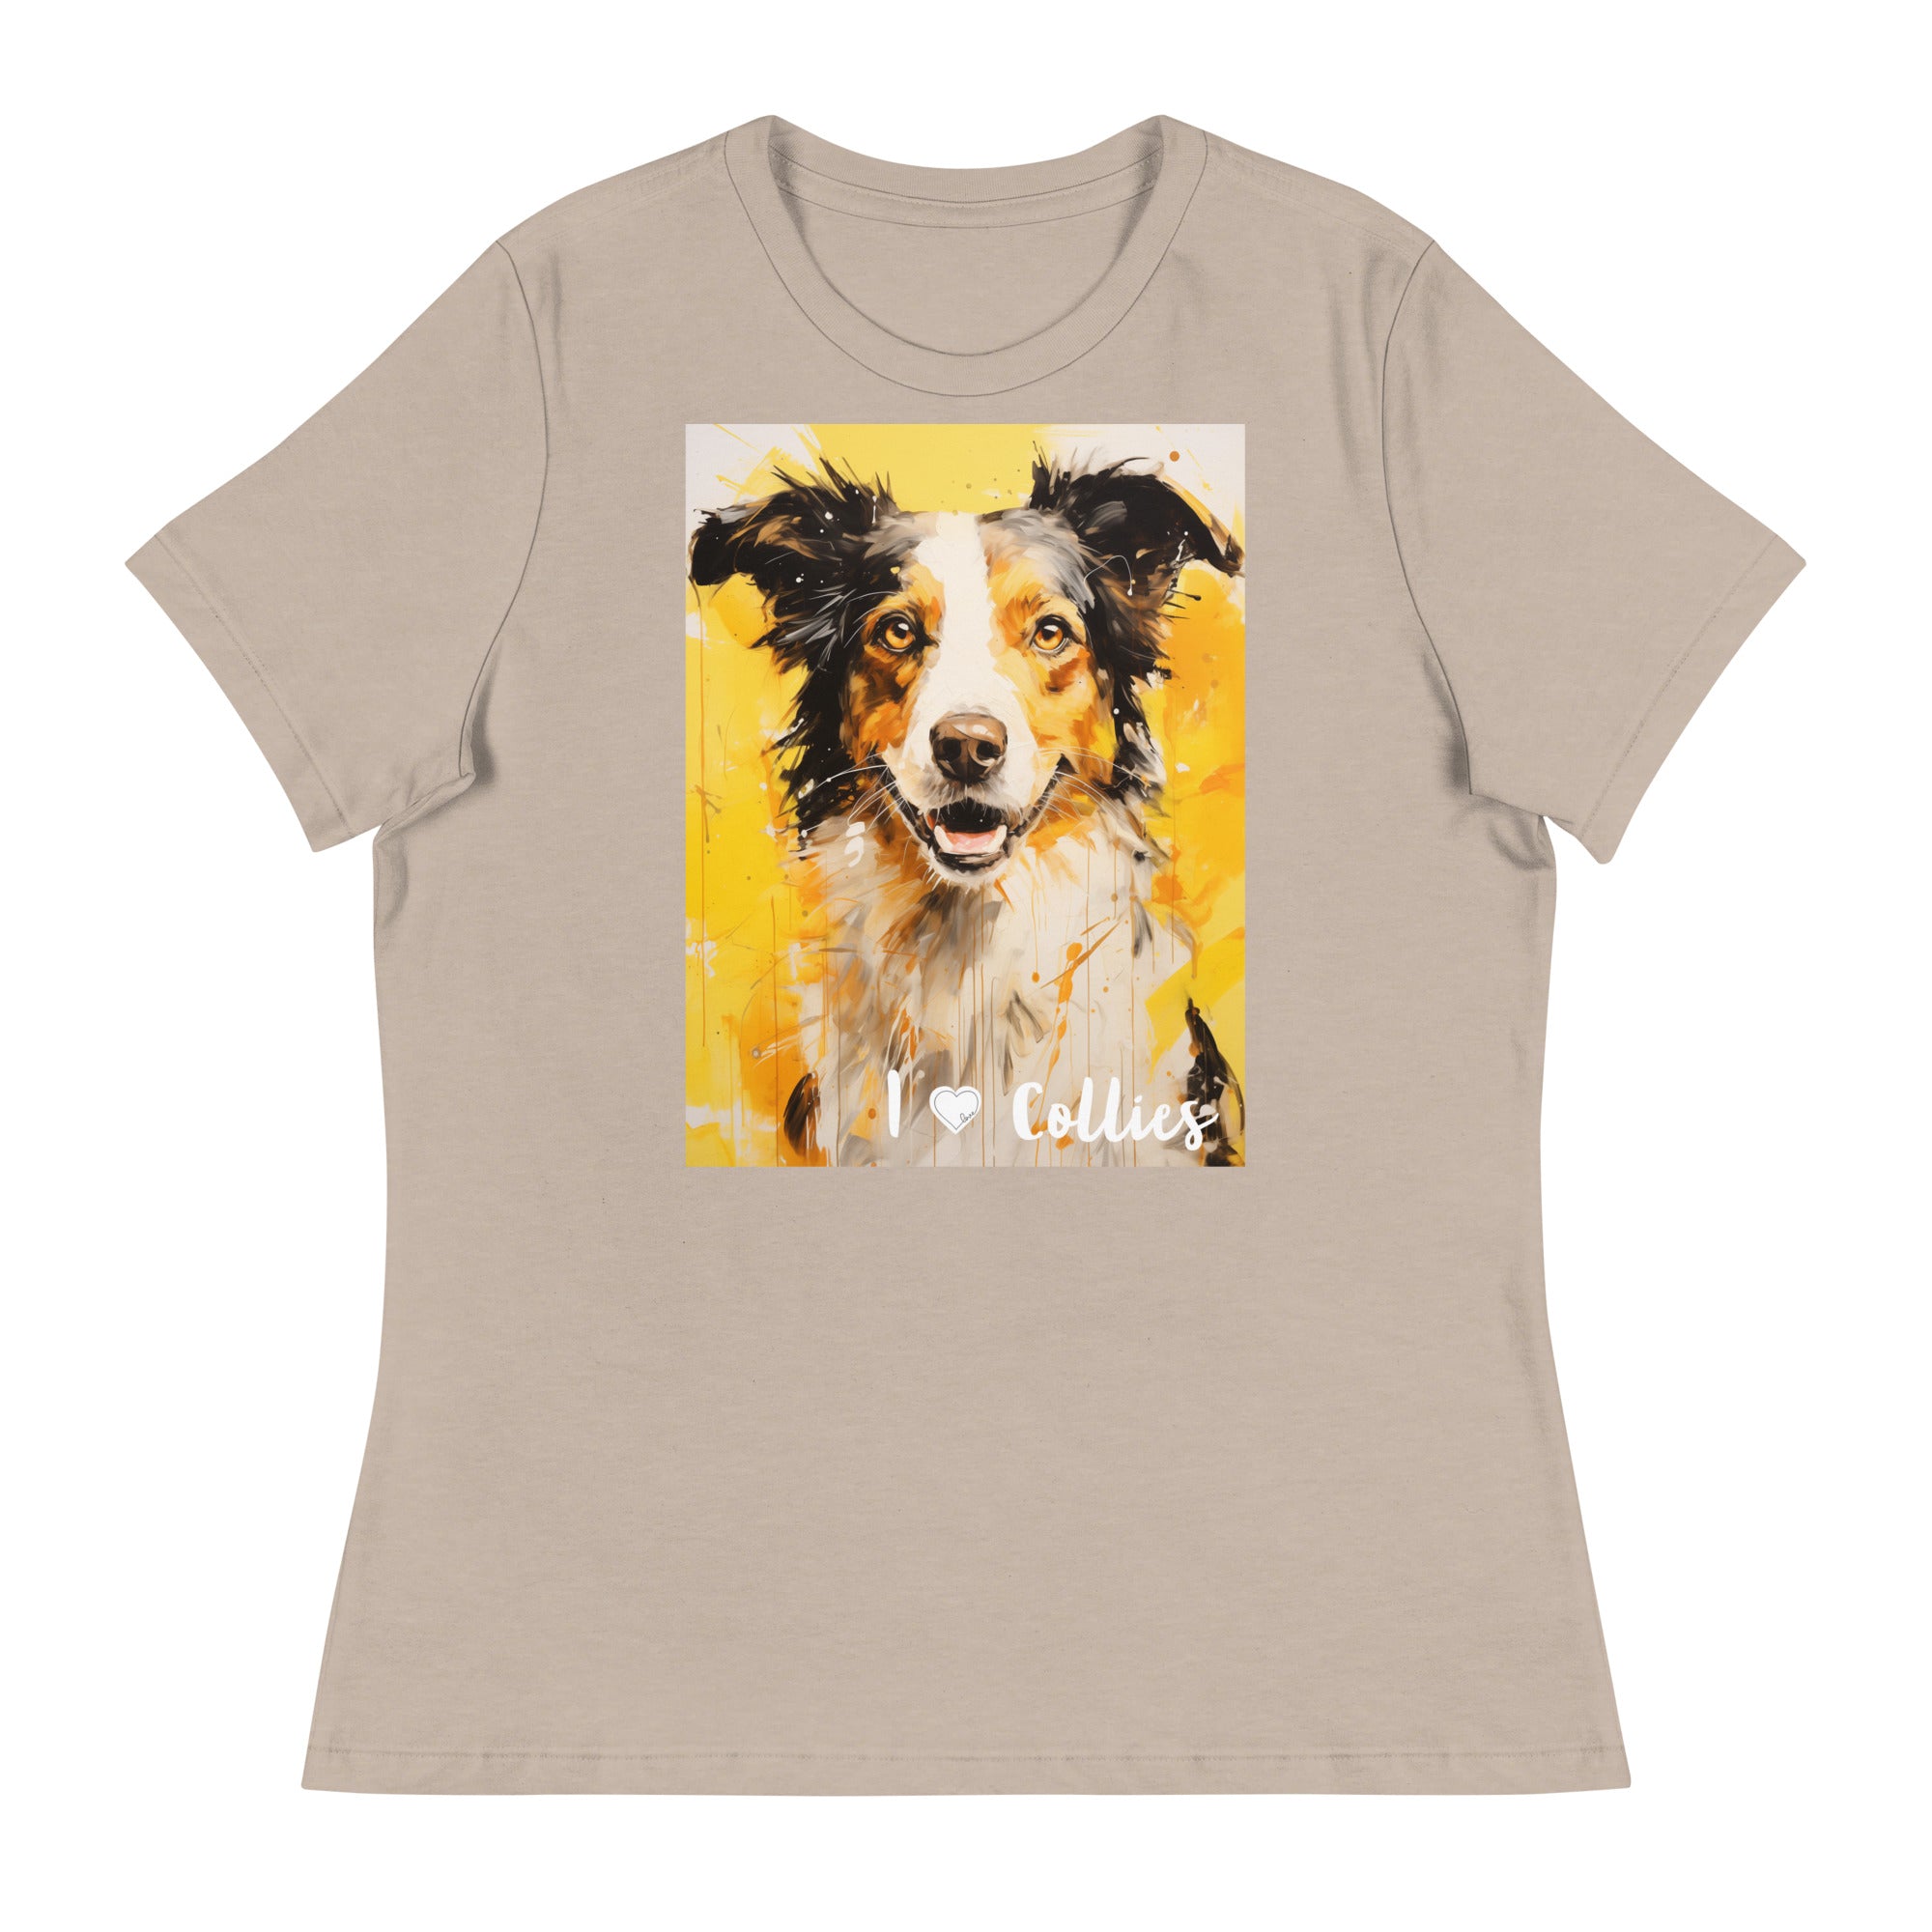 Women's Relaxed T-Shirt - I ❤ Dogs - Border Collie